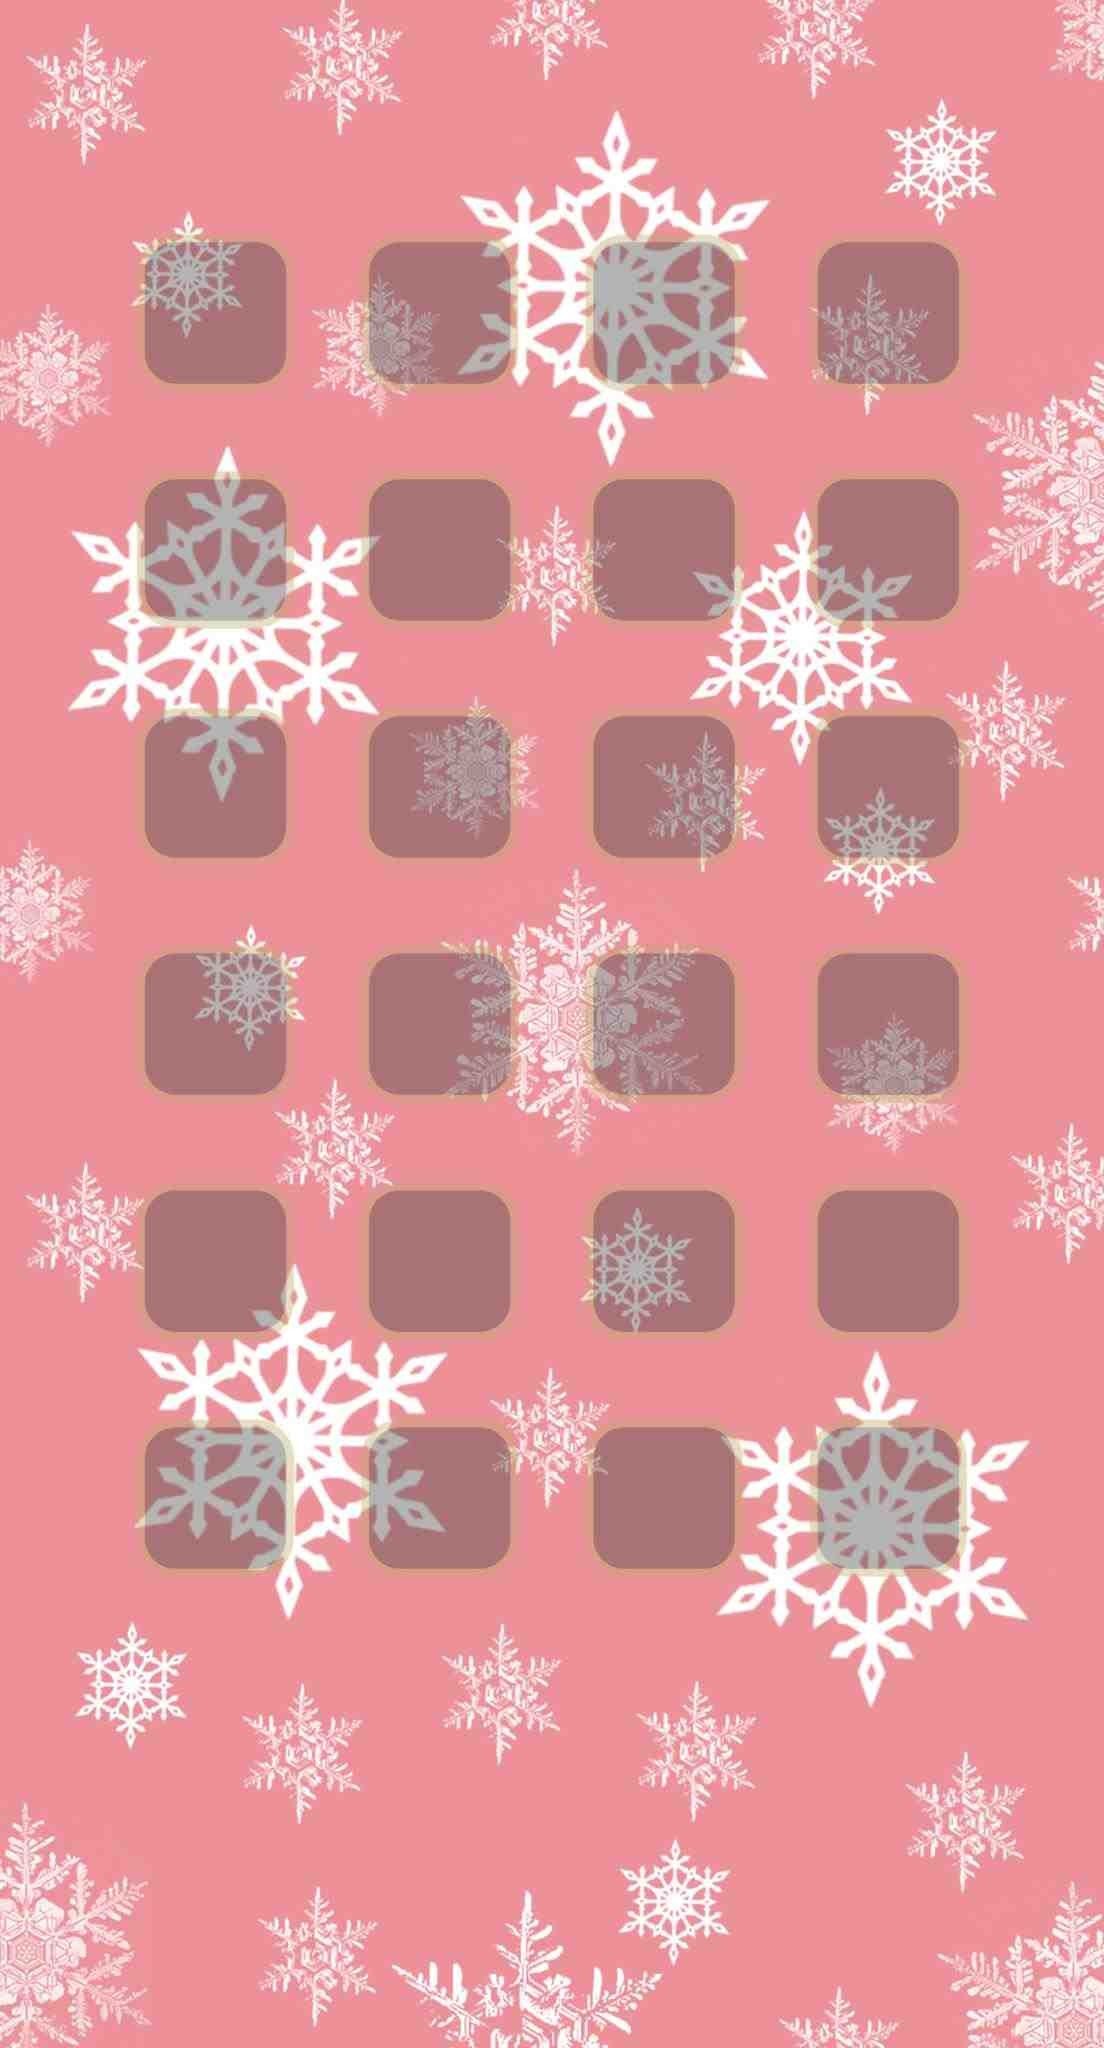 Preppy Christmas Wallpaper:Amazon.ca:Appstore for Android